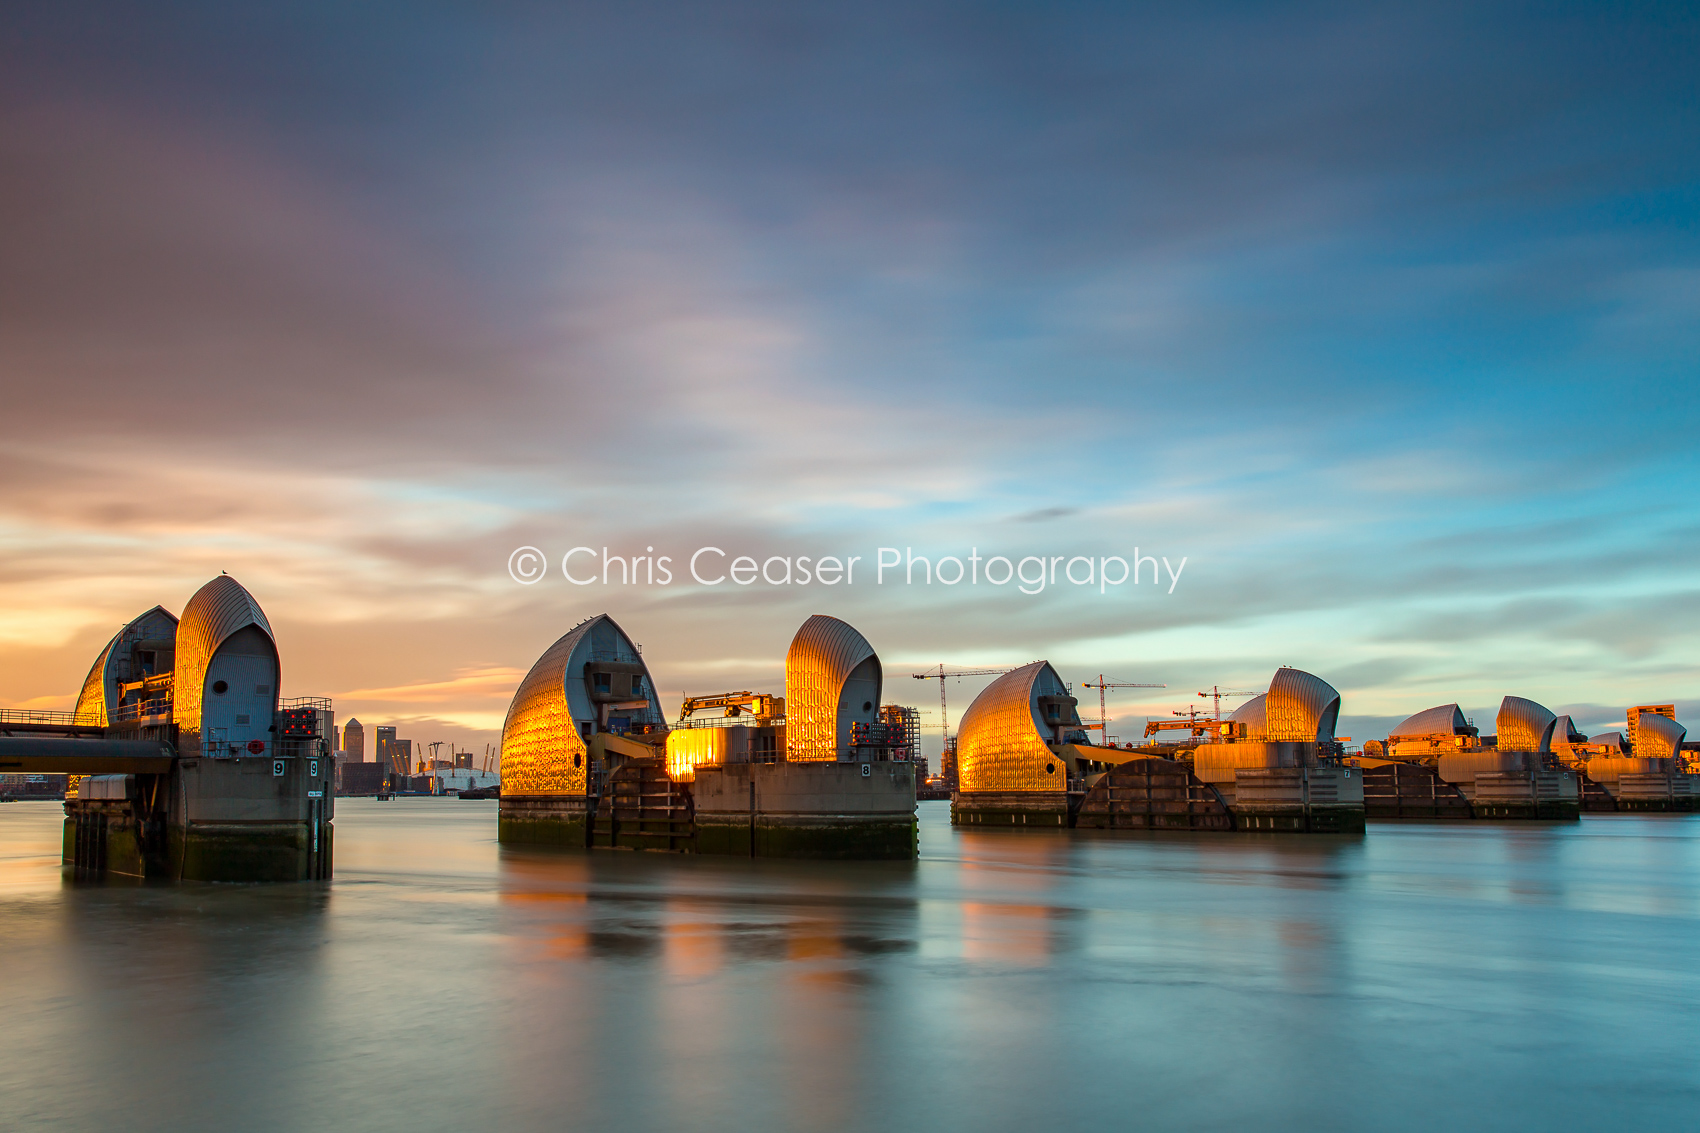 The Thames Barrier, London